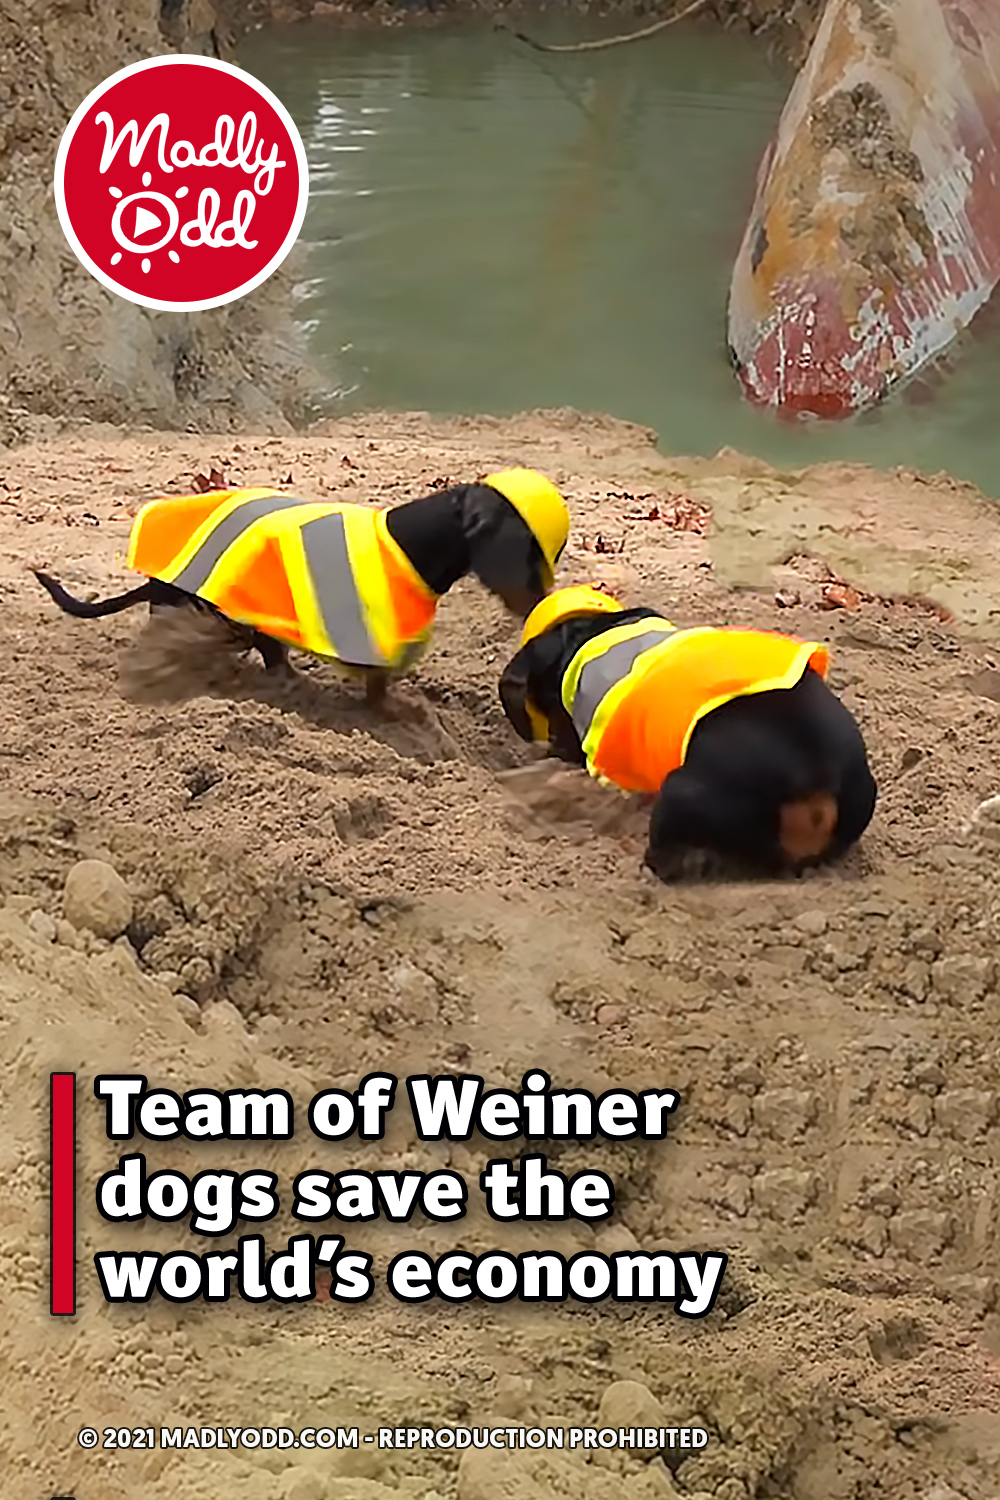 Team of Weiner dogs save the world’s economy